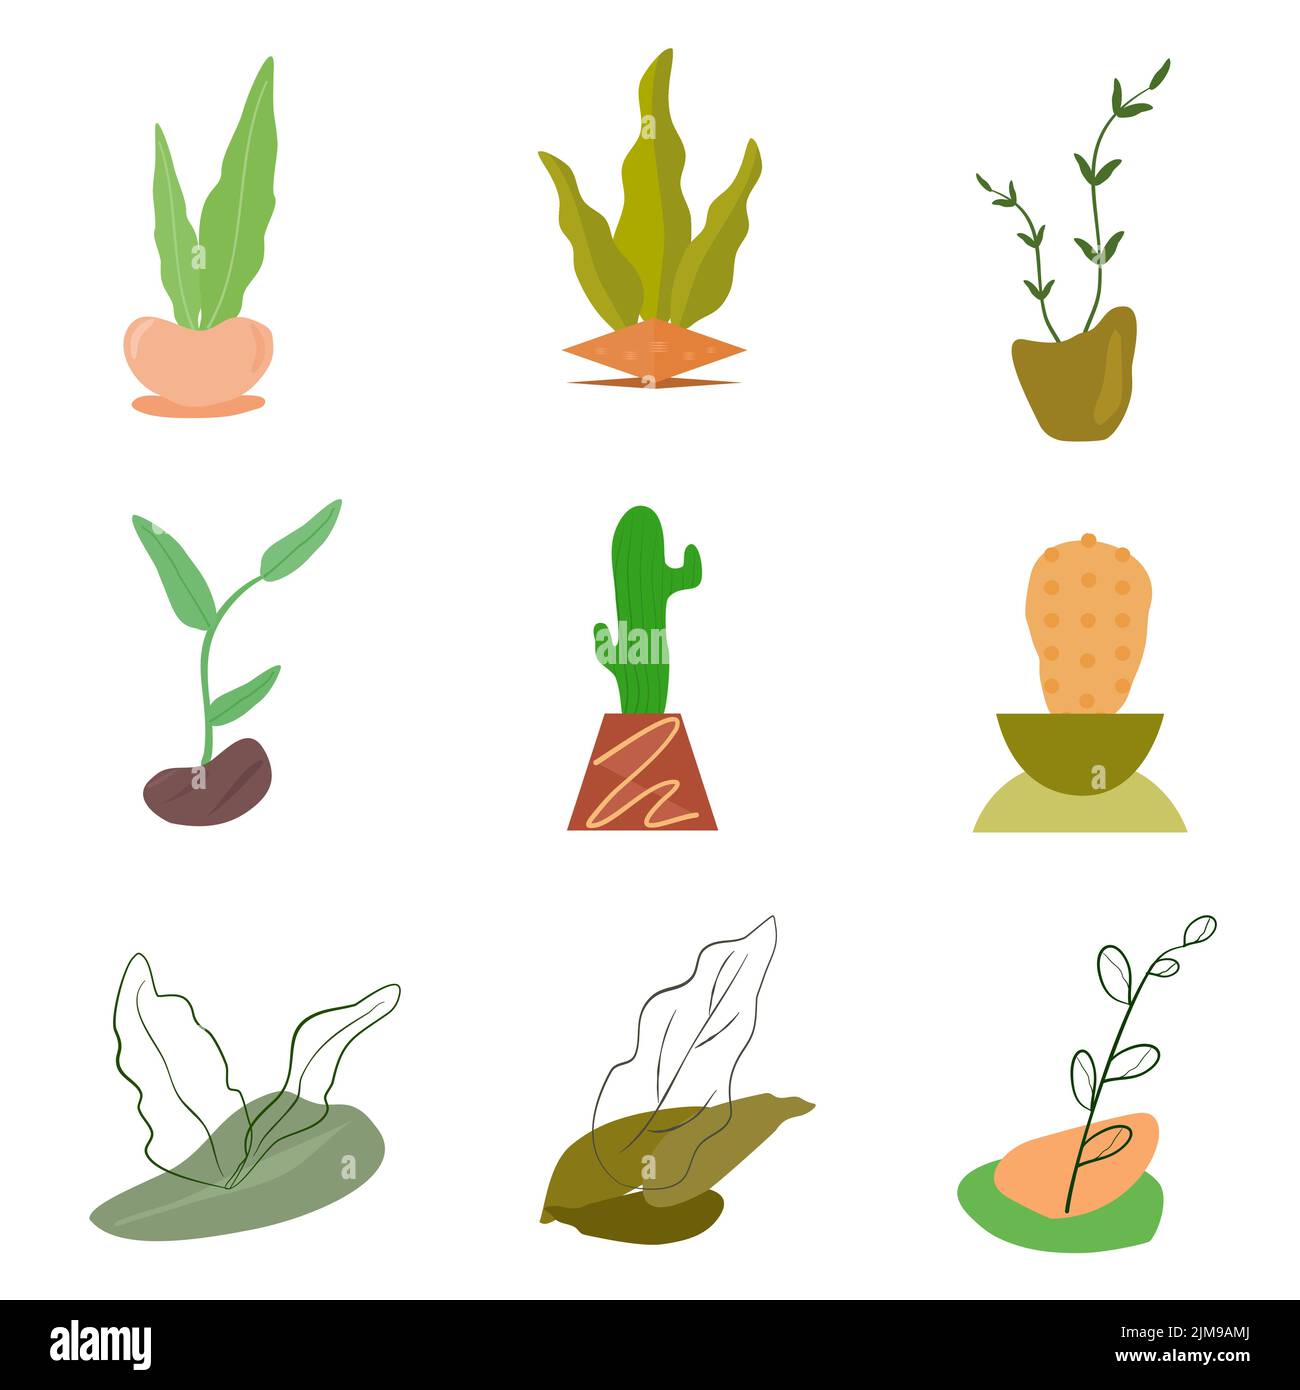 Aesthetic plants botanical foliage minimalist icon elements art graphic design abstract background decoration collection vector illustration Stock Vector